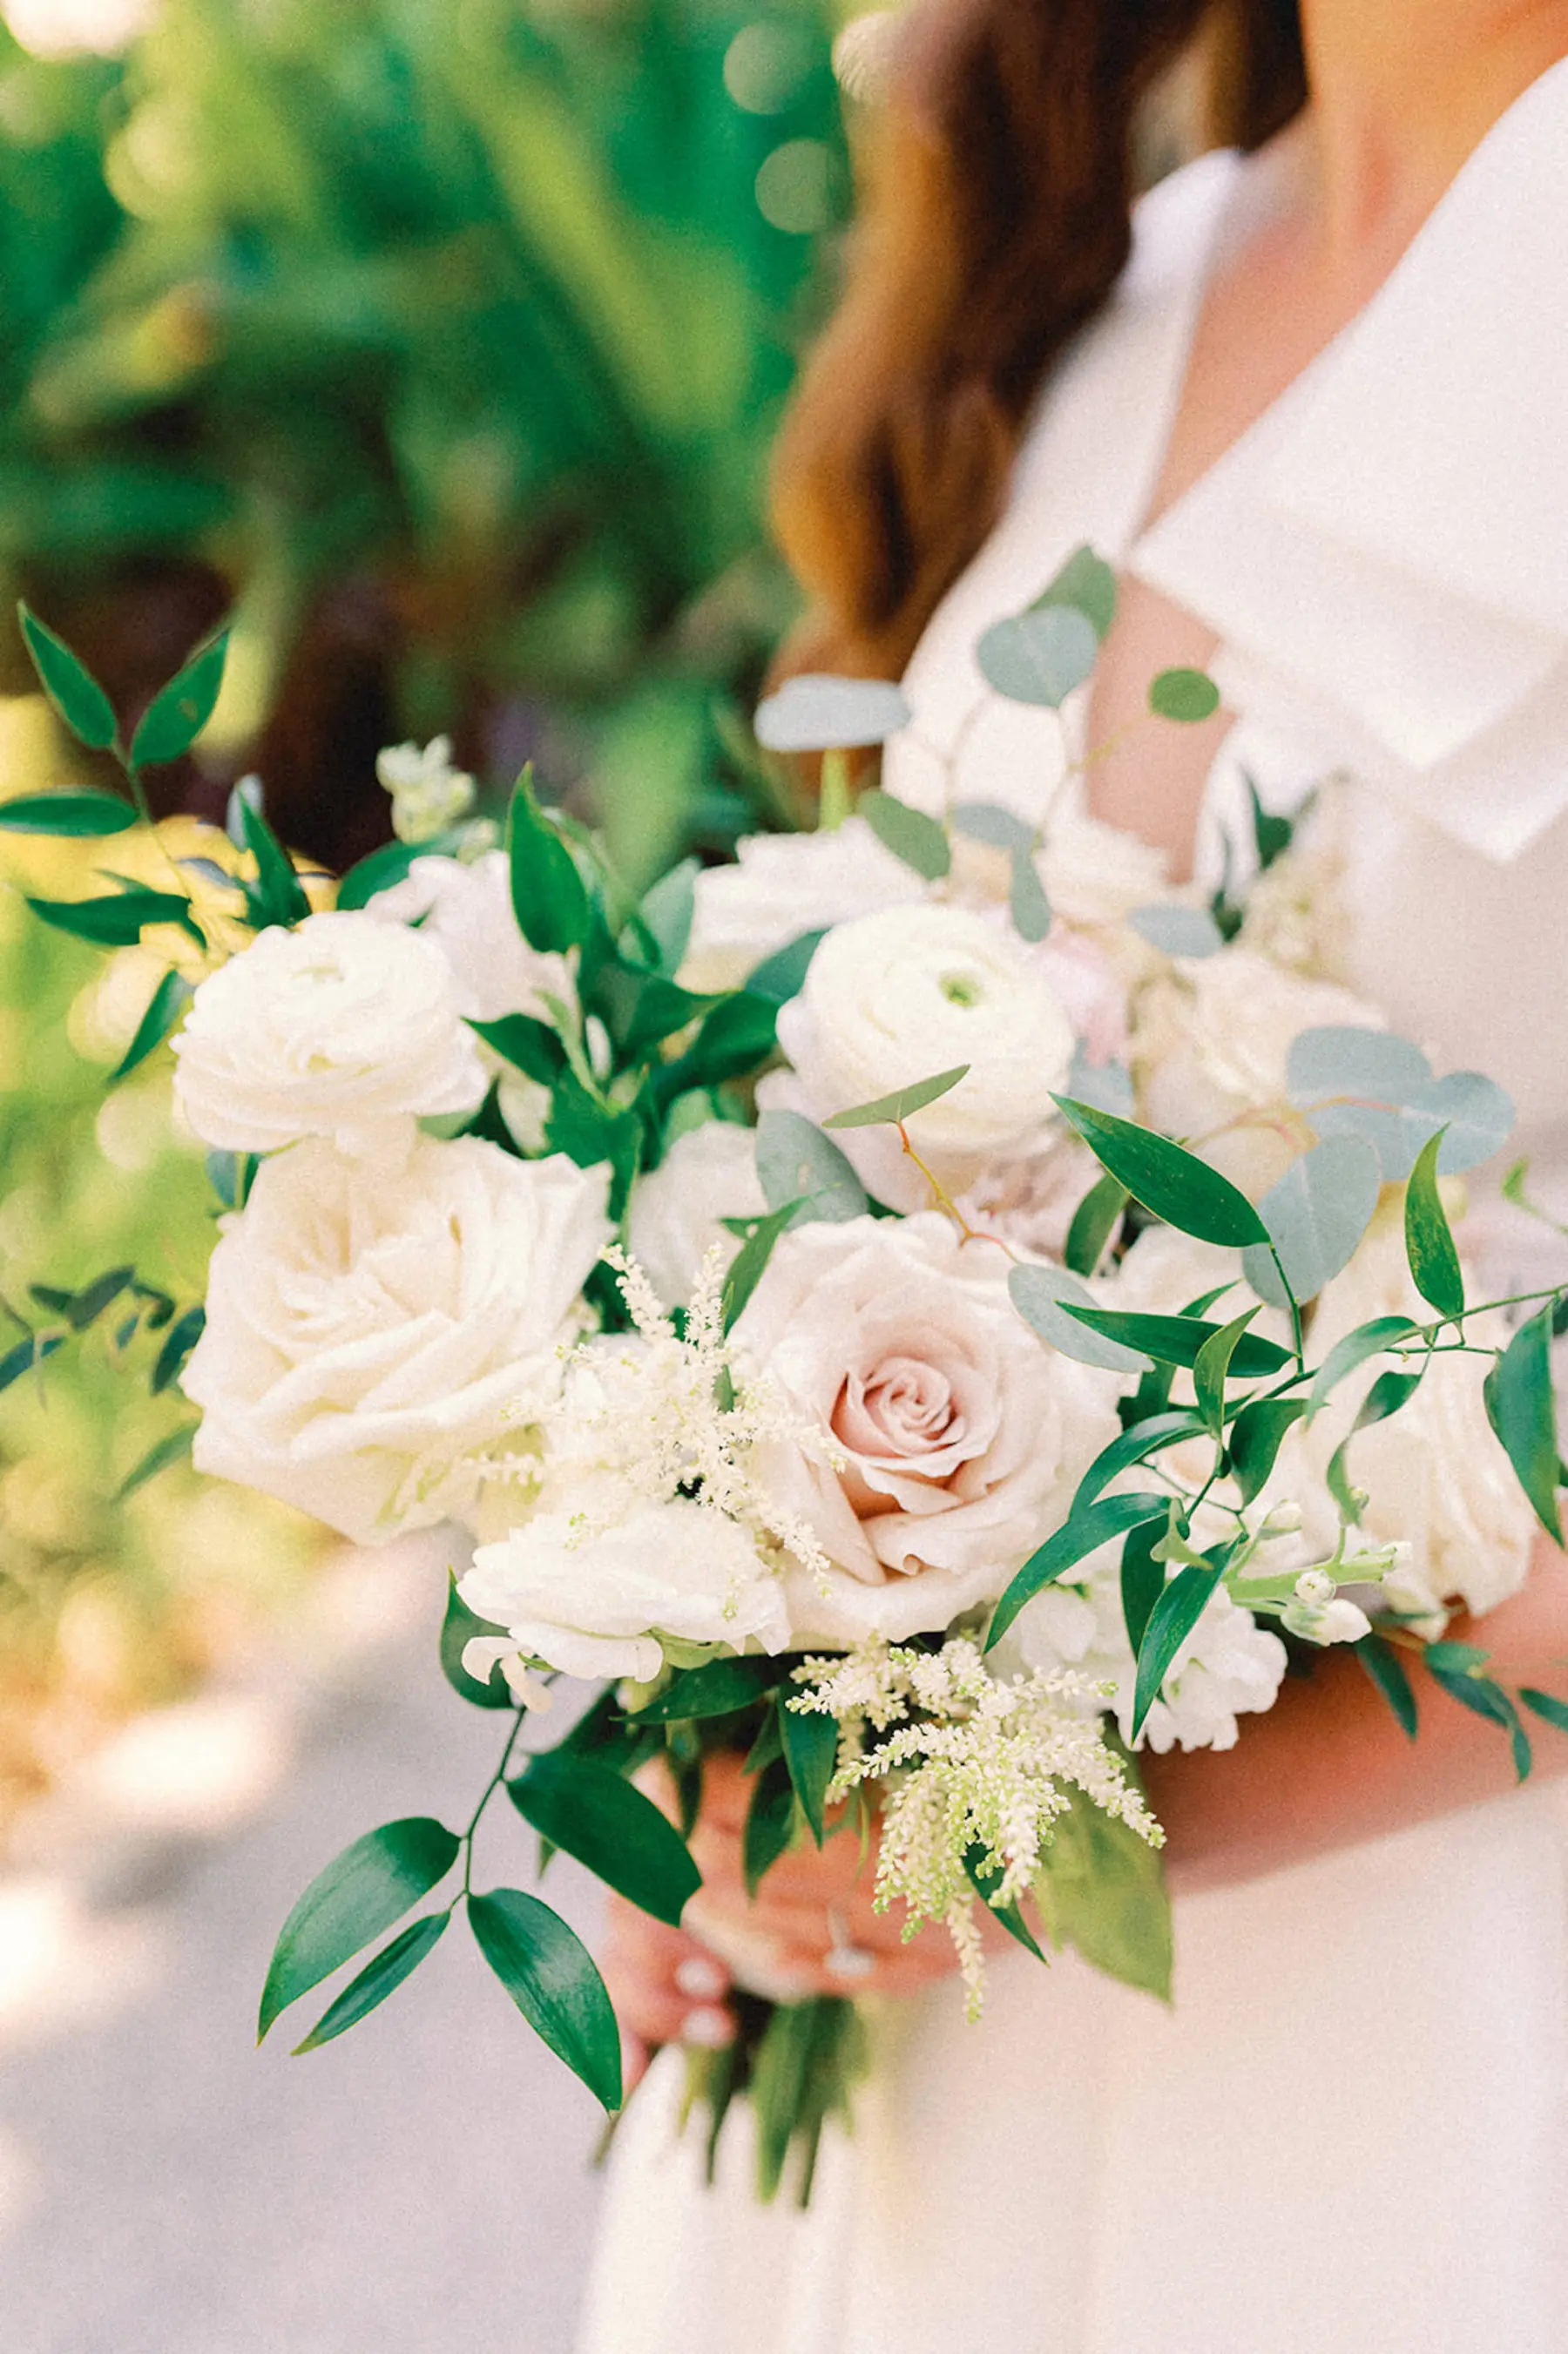 Blush Pink Roses, White Anemone, and Greenery Bridal Wedding Bouquet Ideas